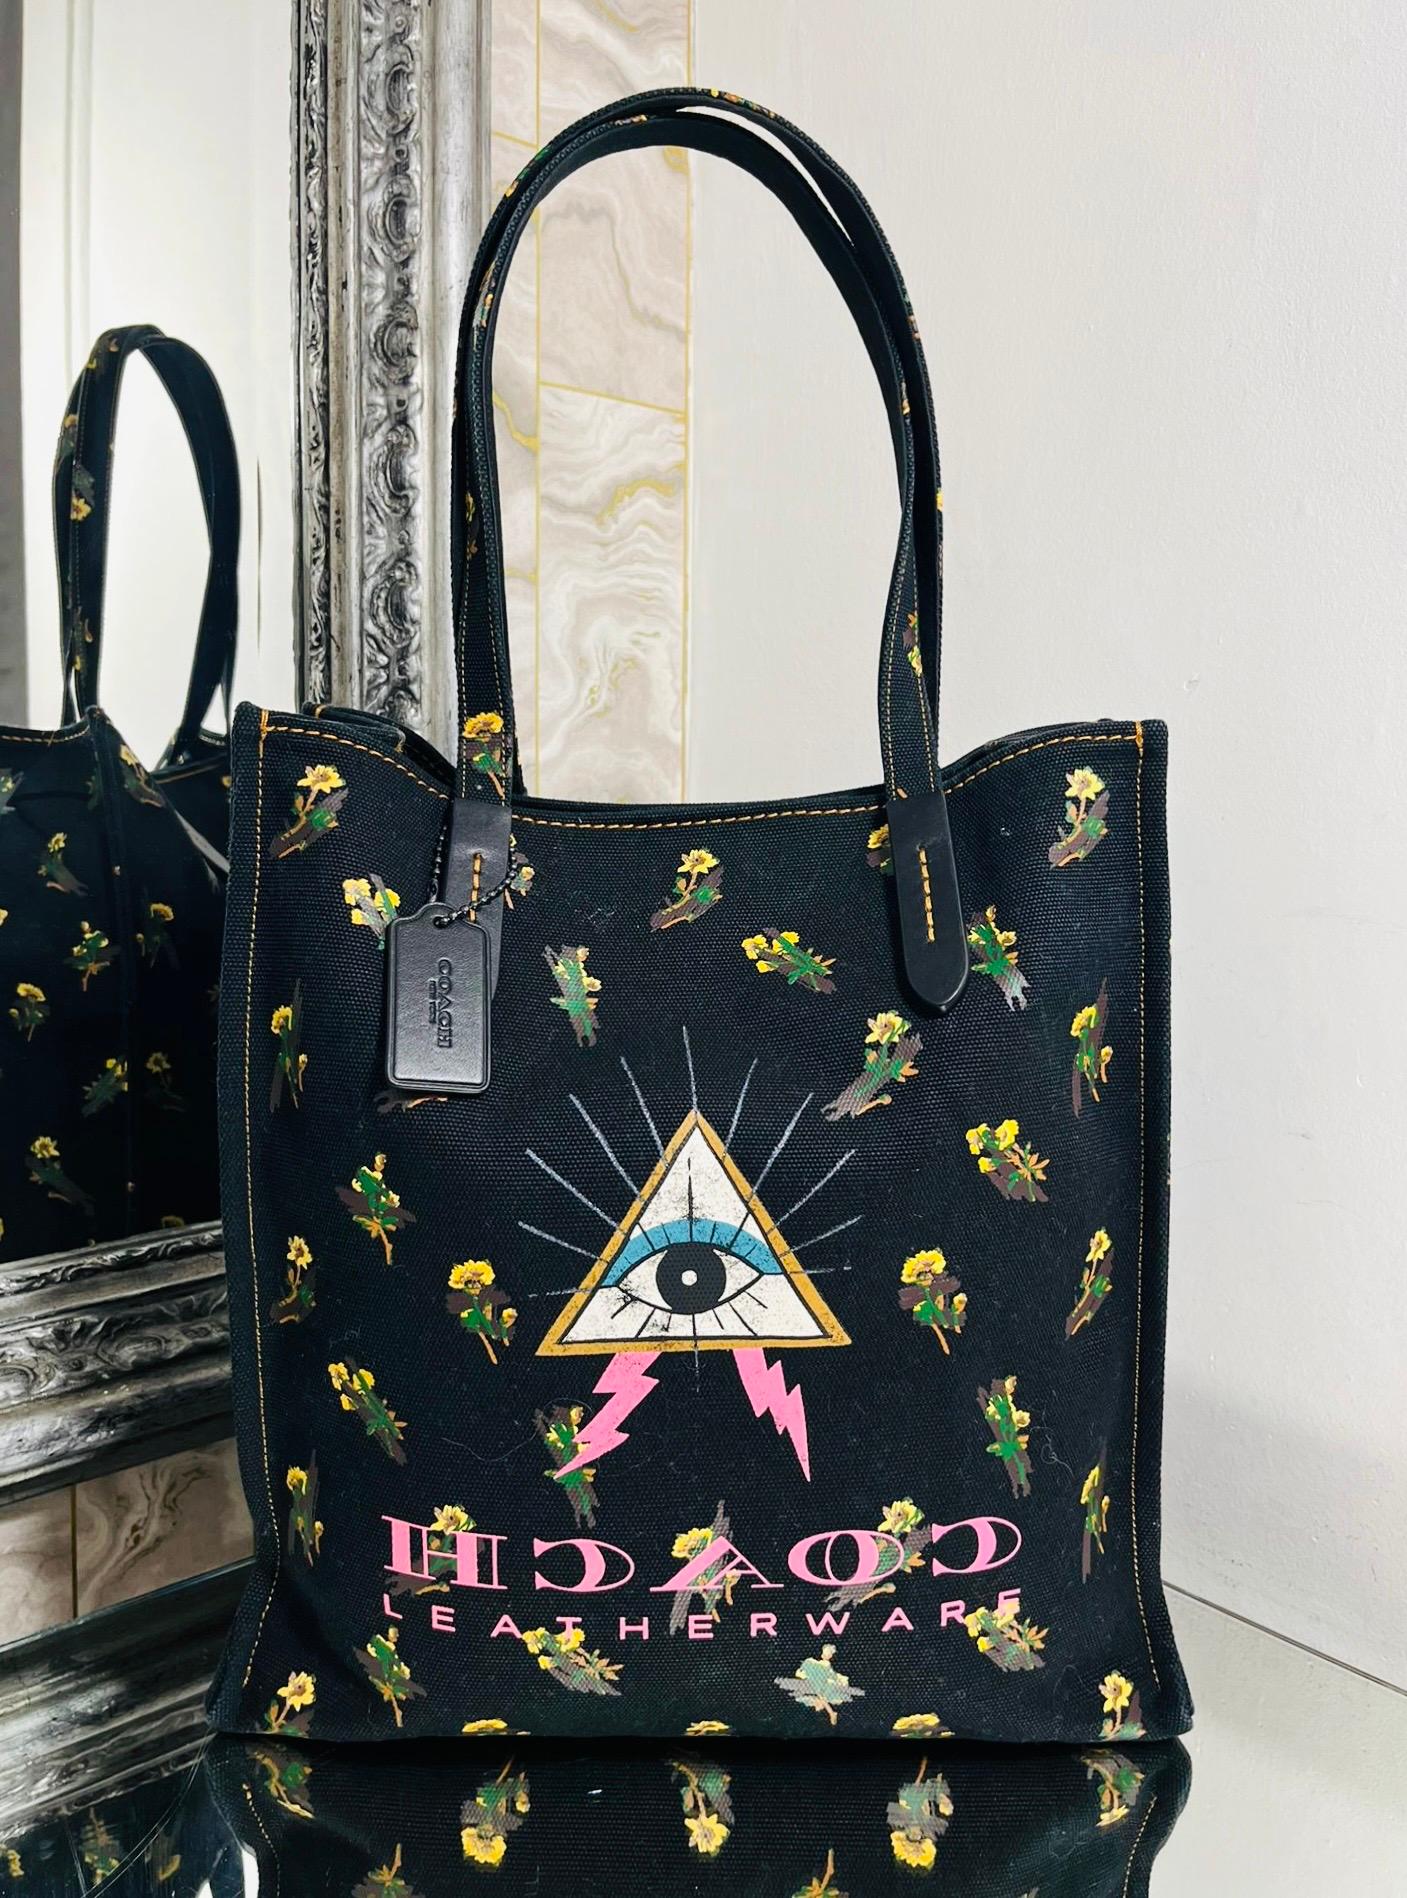 Coach Pyramid Eye Canvas Tote Bag

Black bag designed with a mixed print of florals and the Pyramid Eye symbol.

Detailed with pink, reversed lettering form the Coach logo at the front.

Featuring dual top handle and leather accents with removable